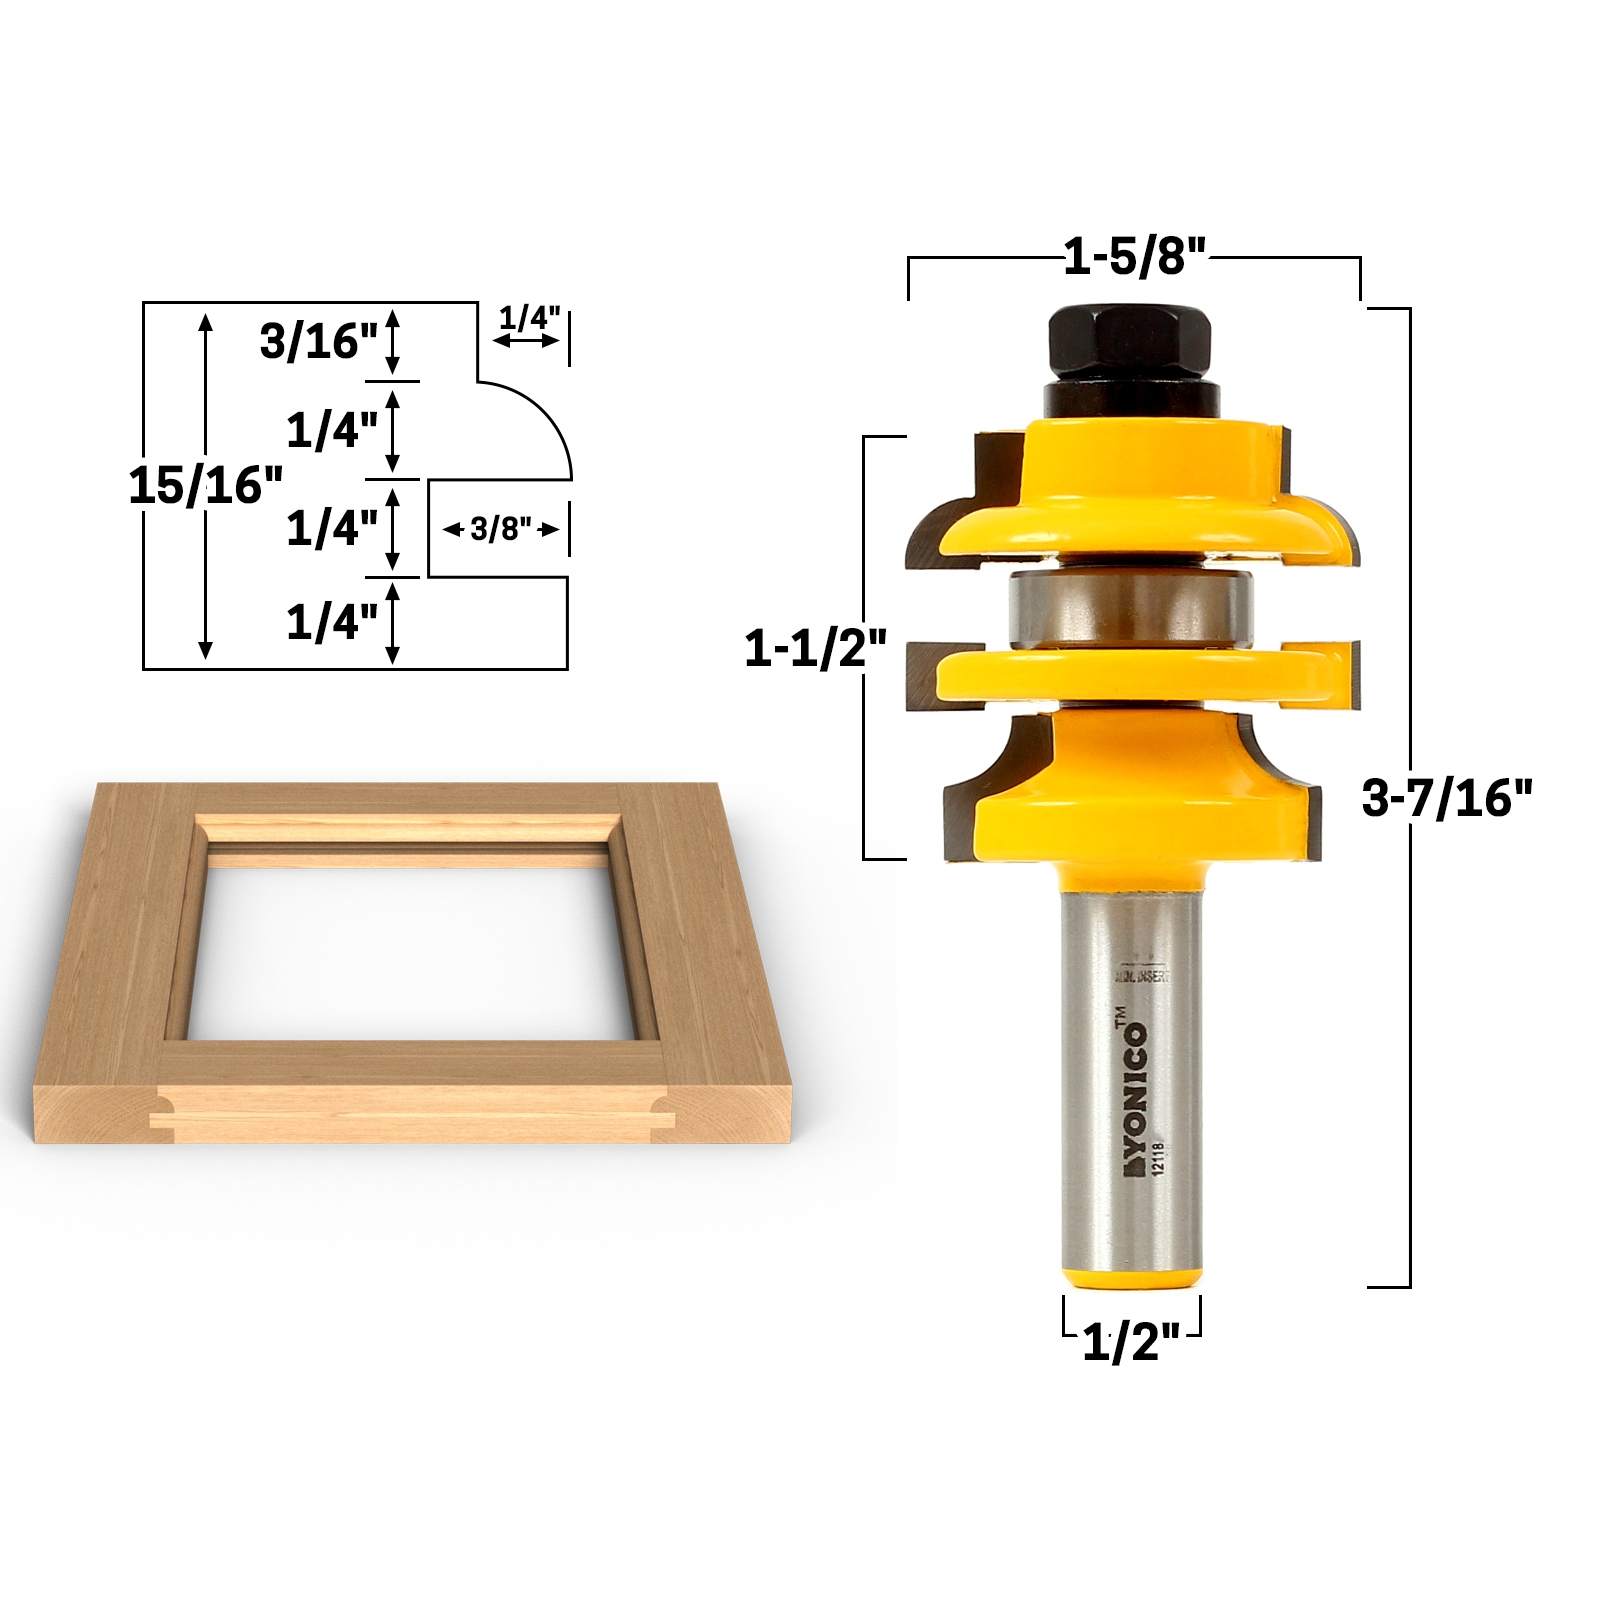 Classical Ogee Stacked Rail and Stile Router Bit Yonico 12120 1/2" Shank 